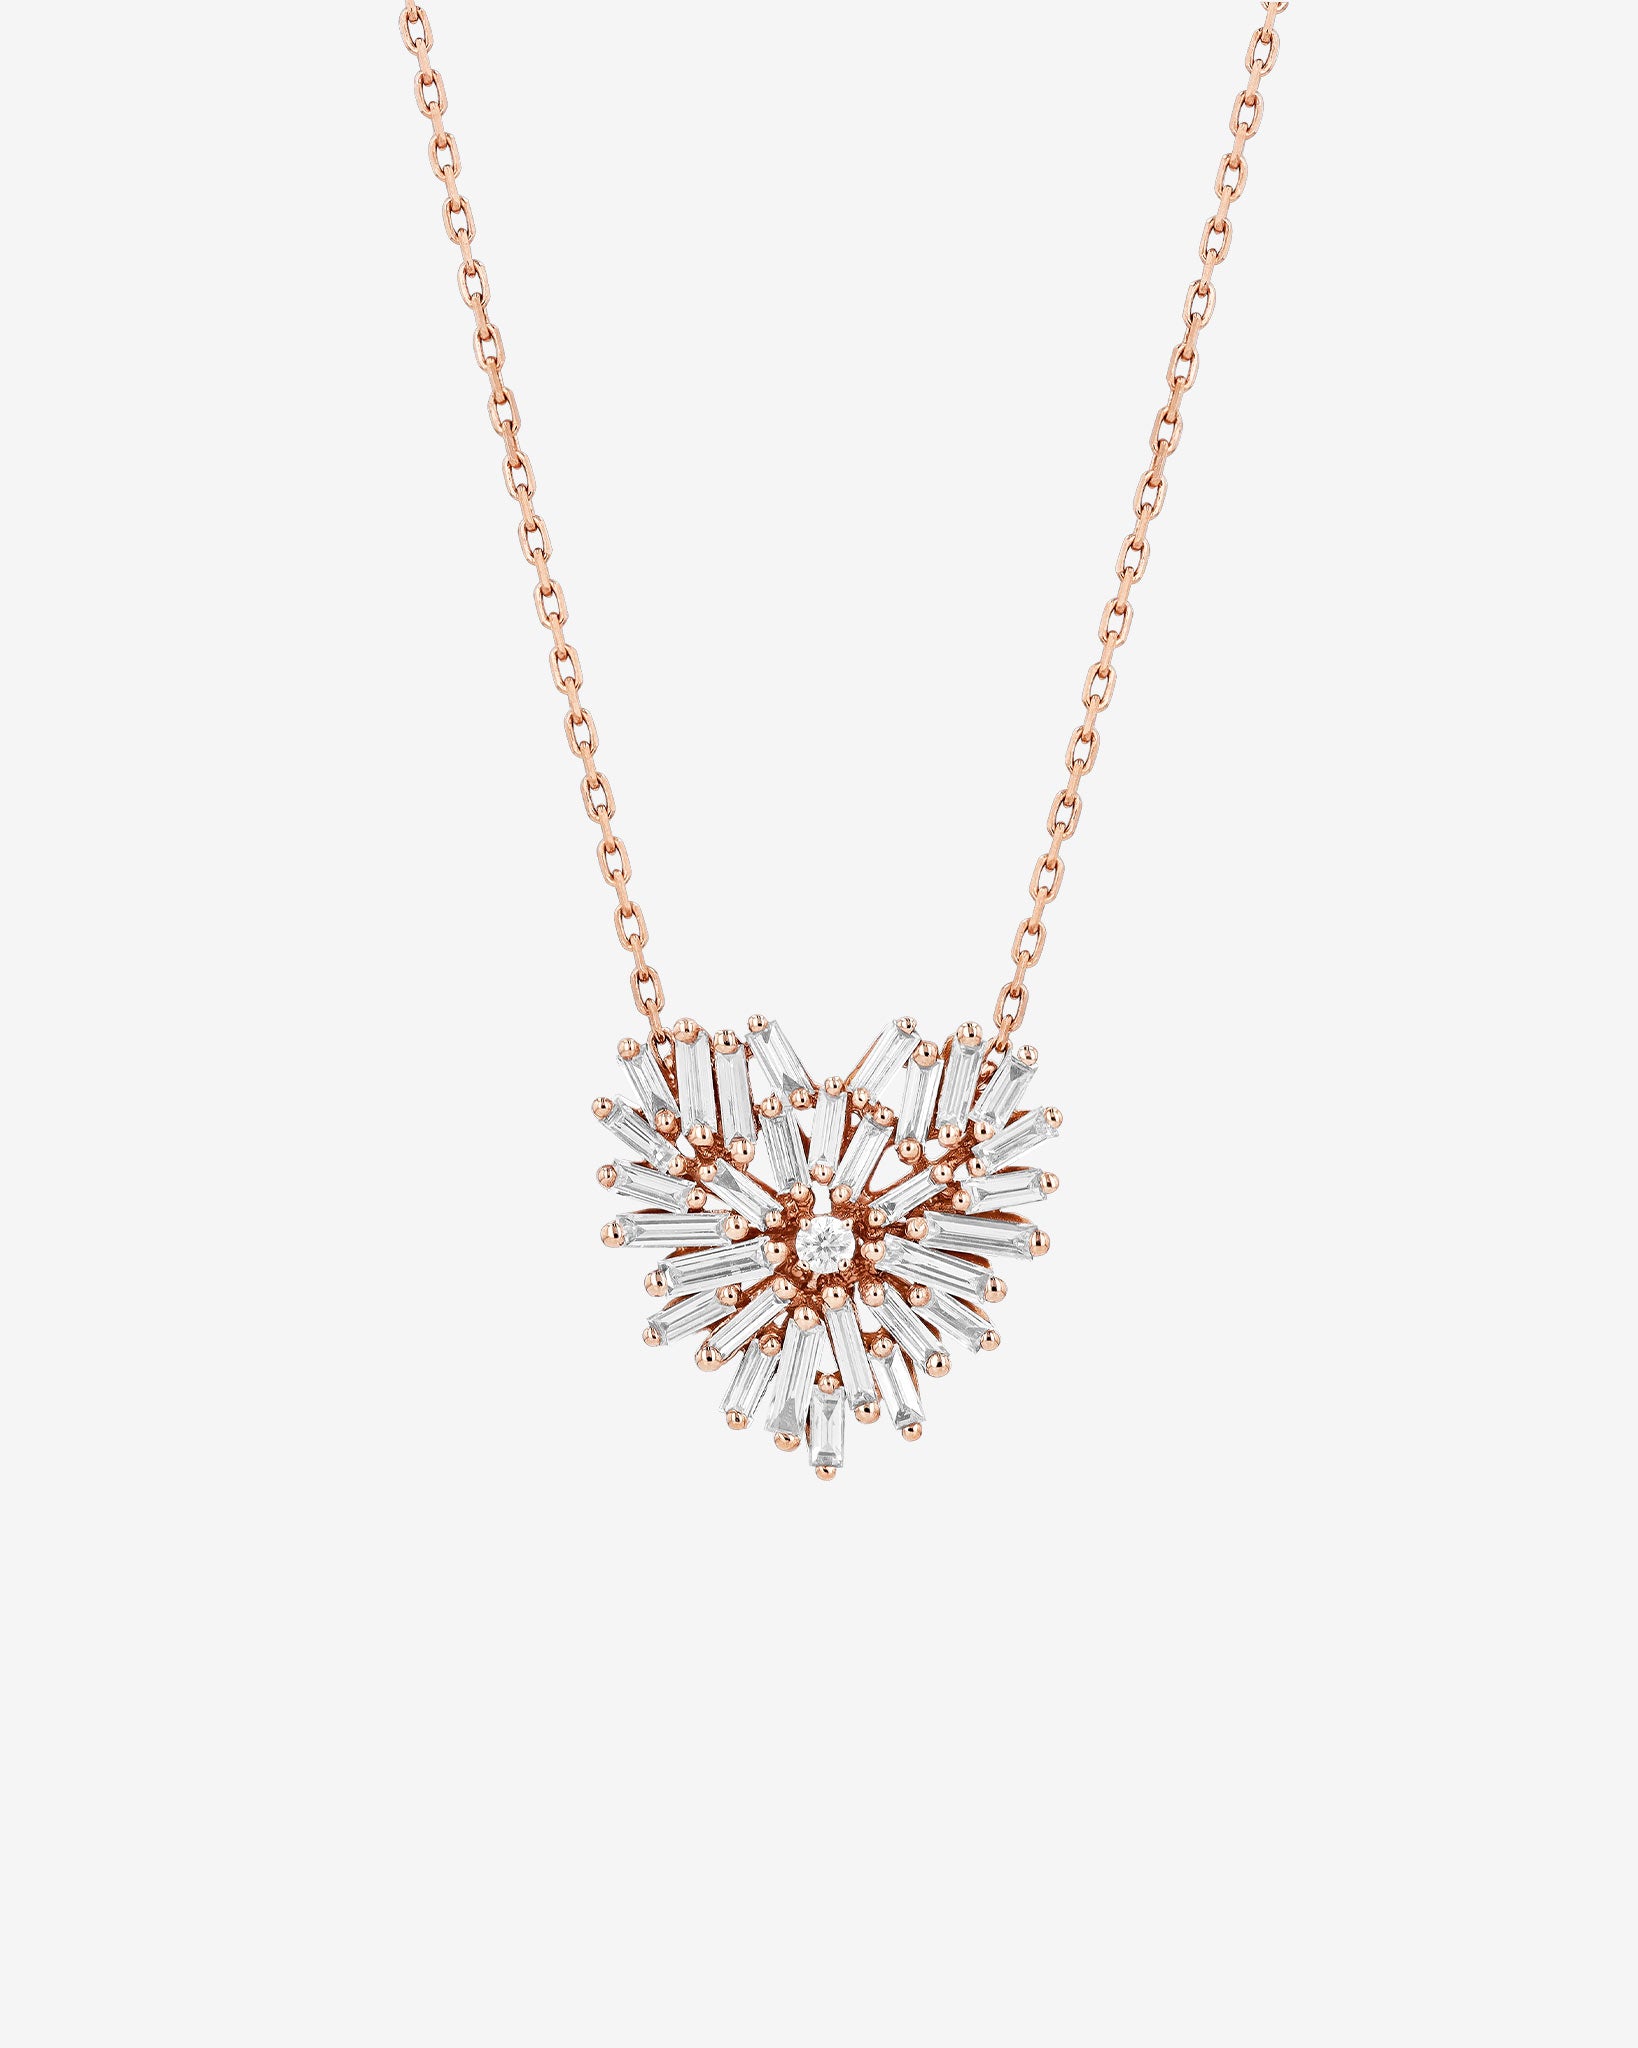 Suzanne Kalan Classic Diamond Small Heart Necklace in 18k rose gold